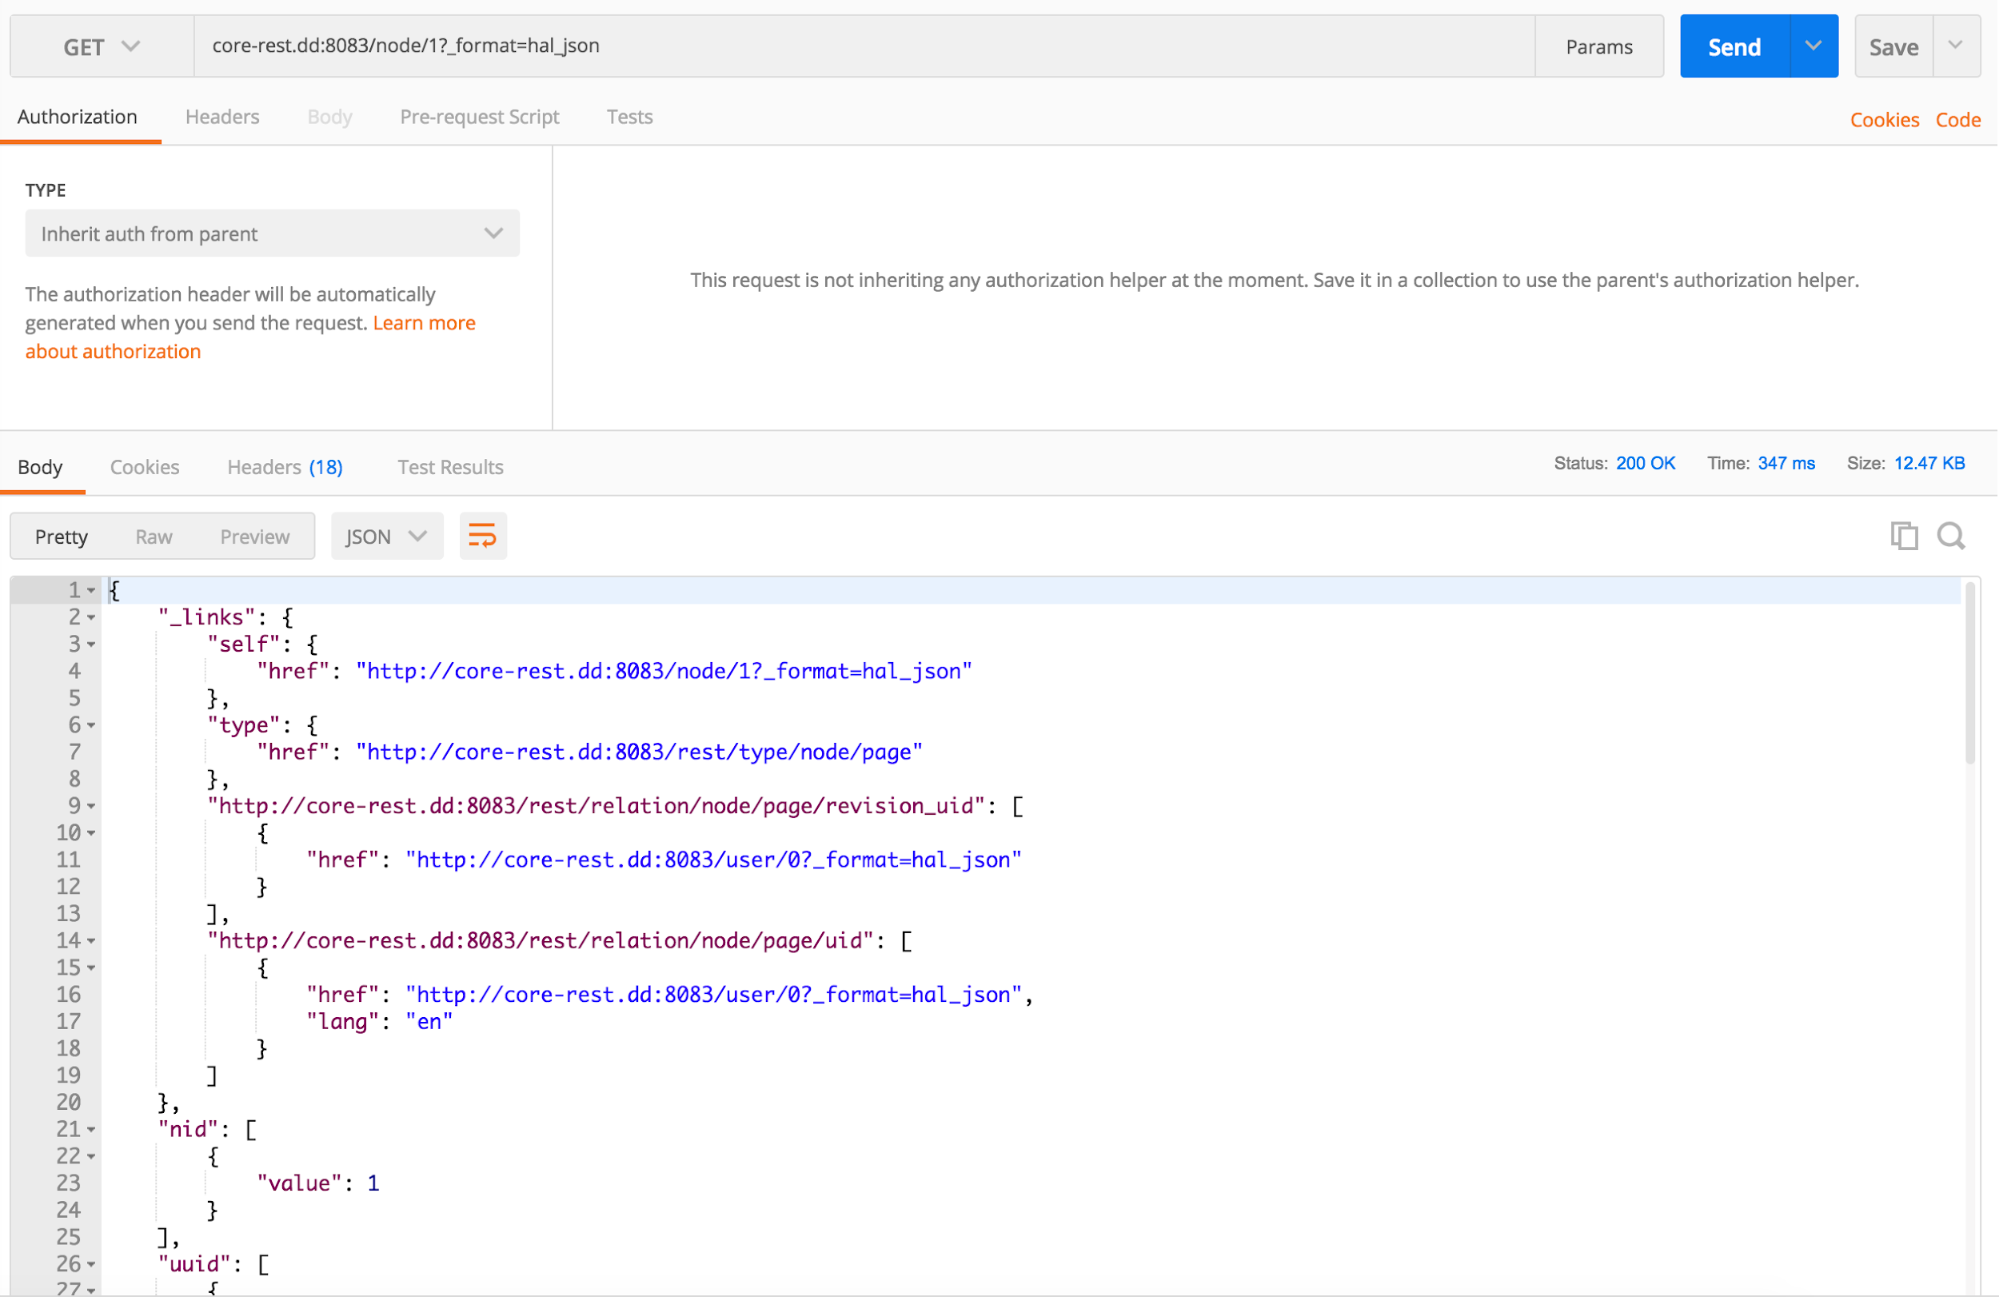 Issuing a GET request with Postman